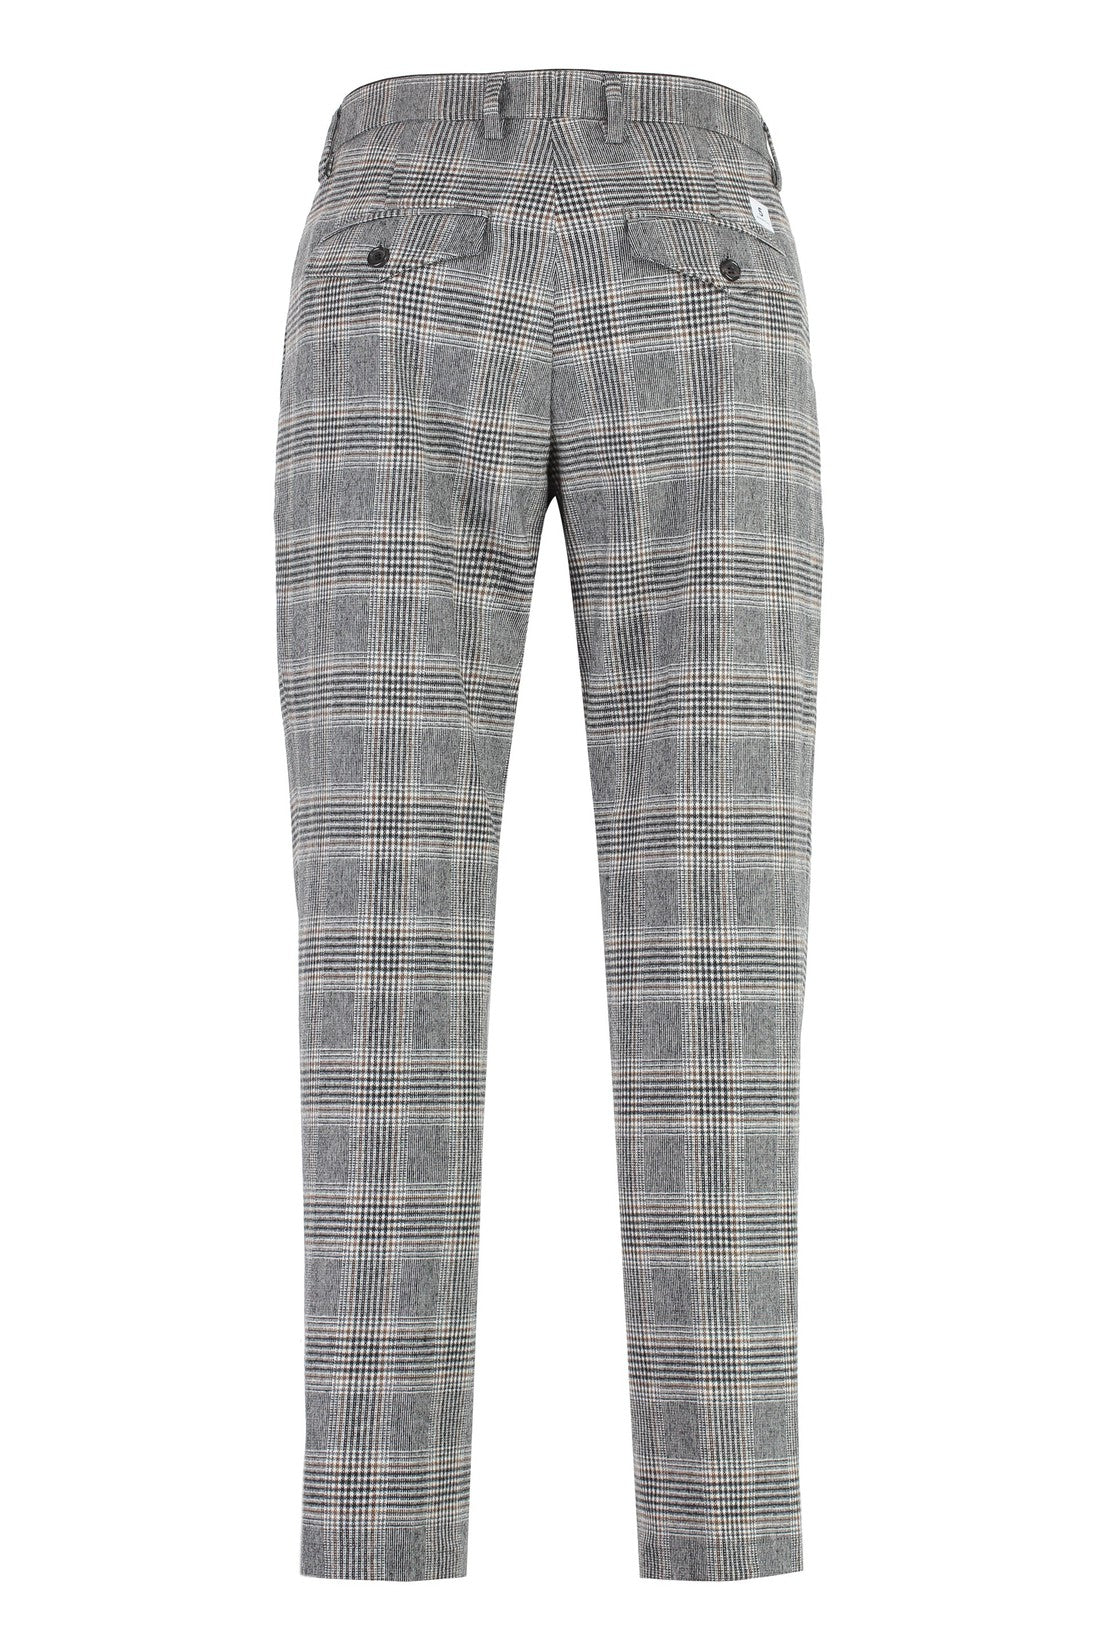 Department 5-OUTLET-SALE-Setter Chino pants in wool blend-ARCHIVIST